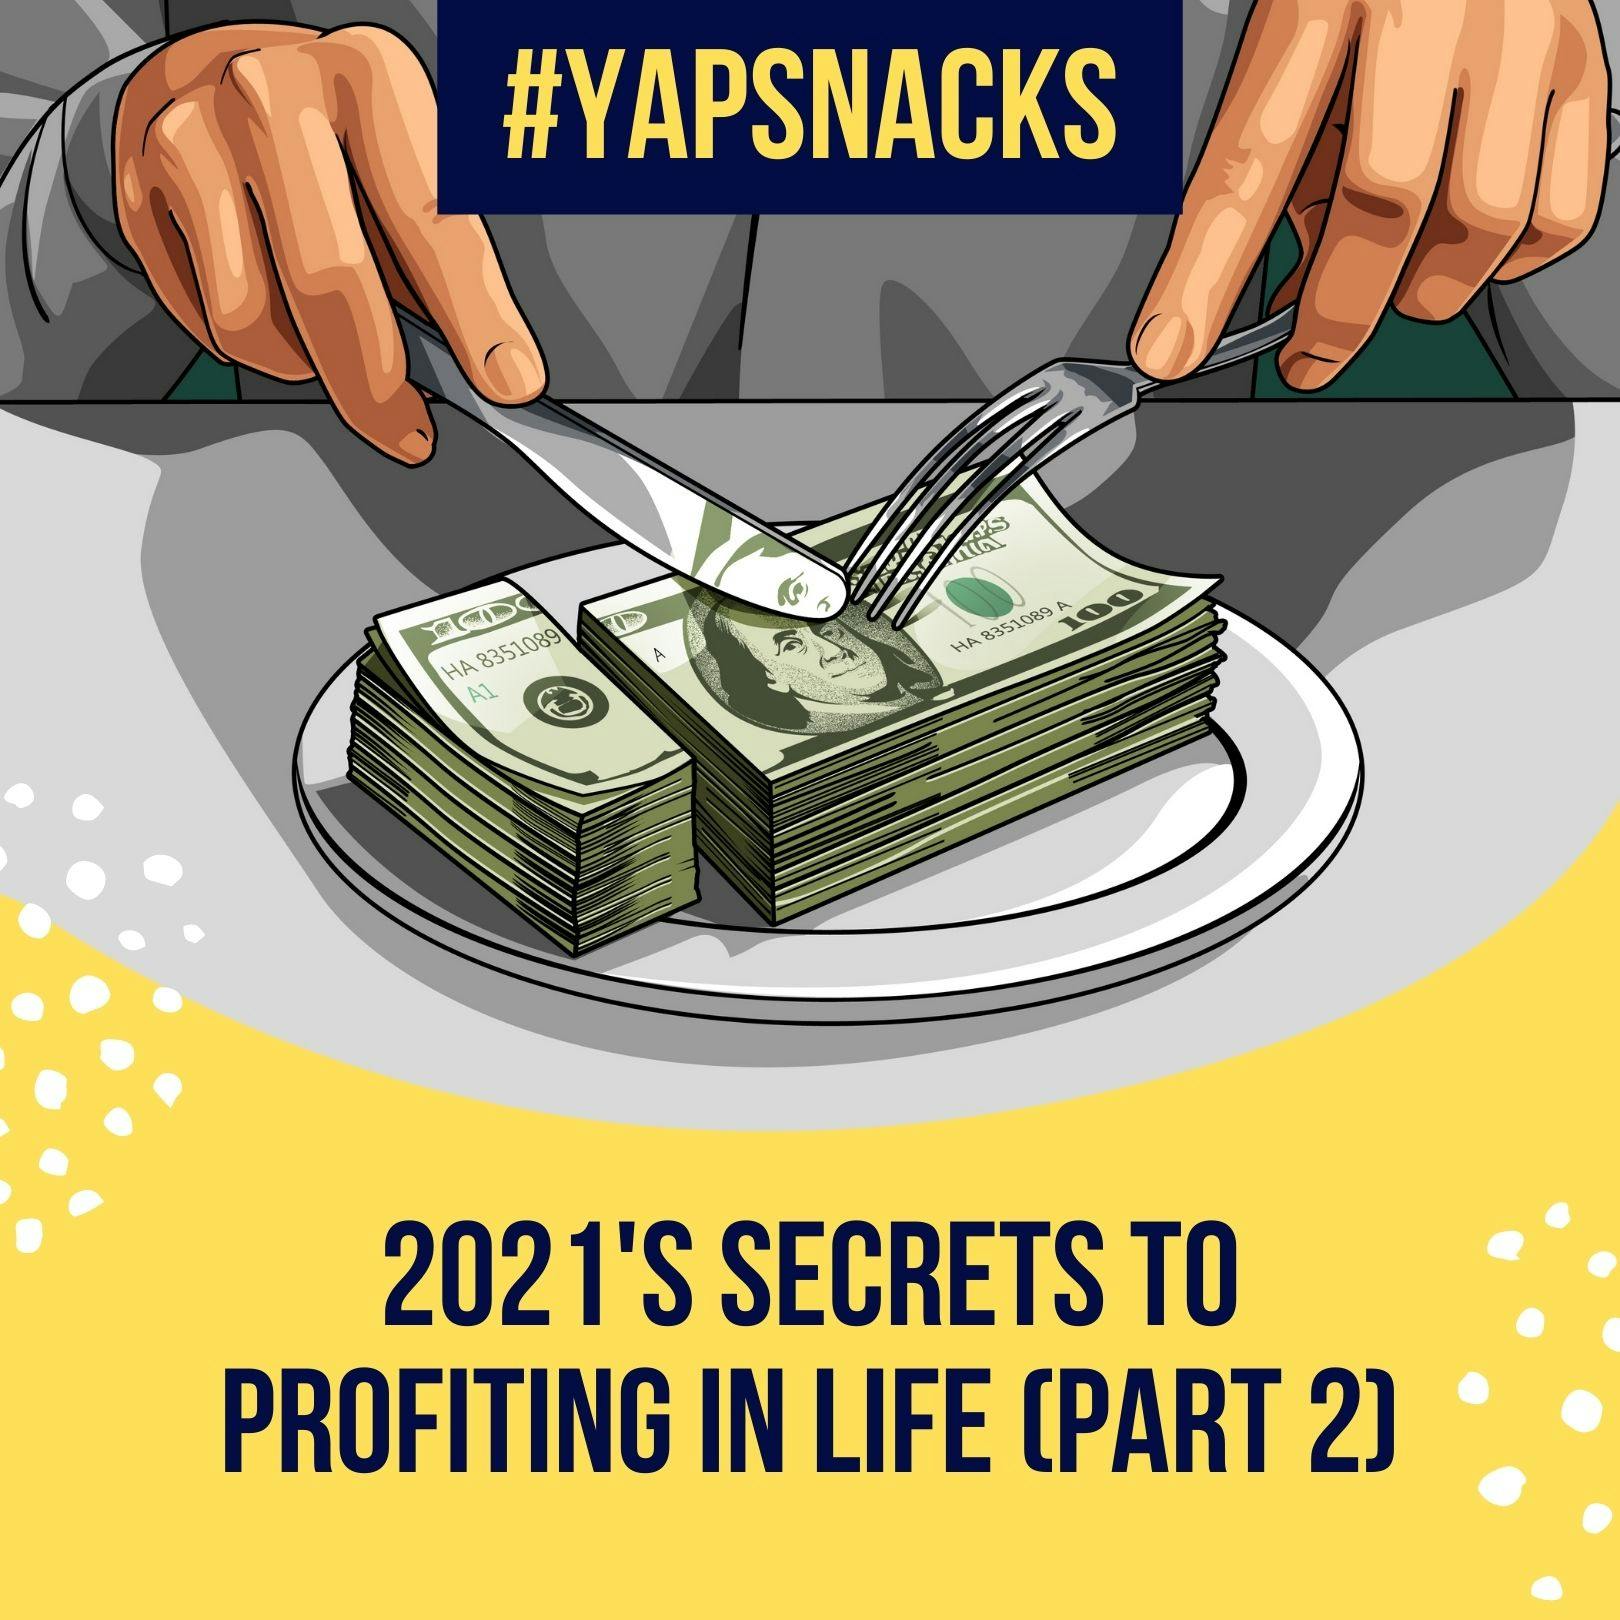 YAPSnacks: 2021's Secrets to Profiting in Life - Love and Service | Part 2